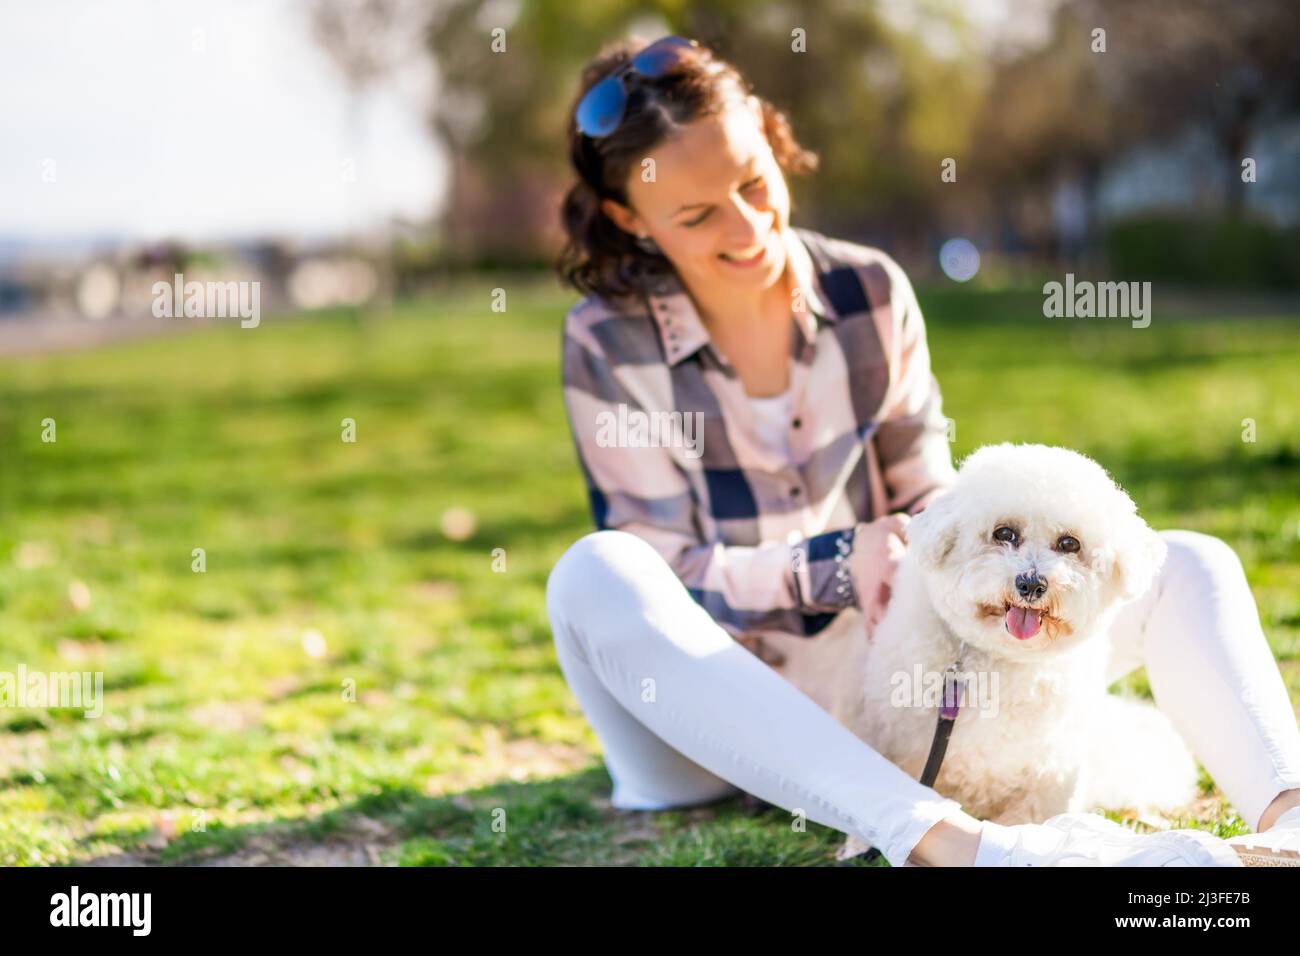 Happy woman is playing with her white bichon frise dog on sunny day in park. Stock Photo